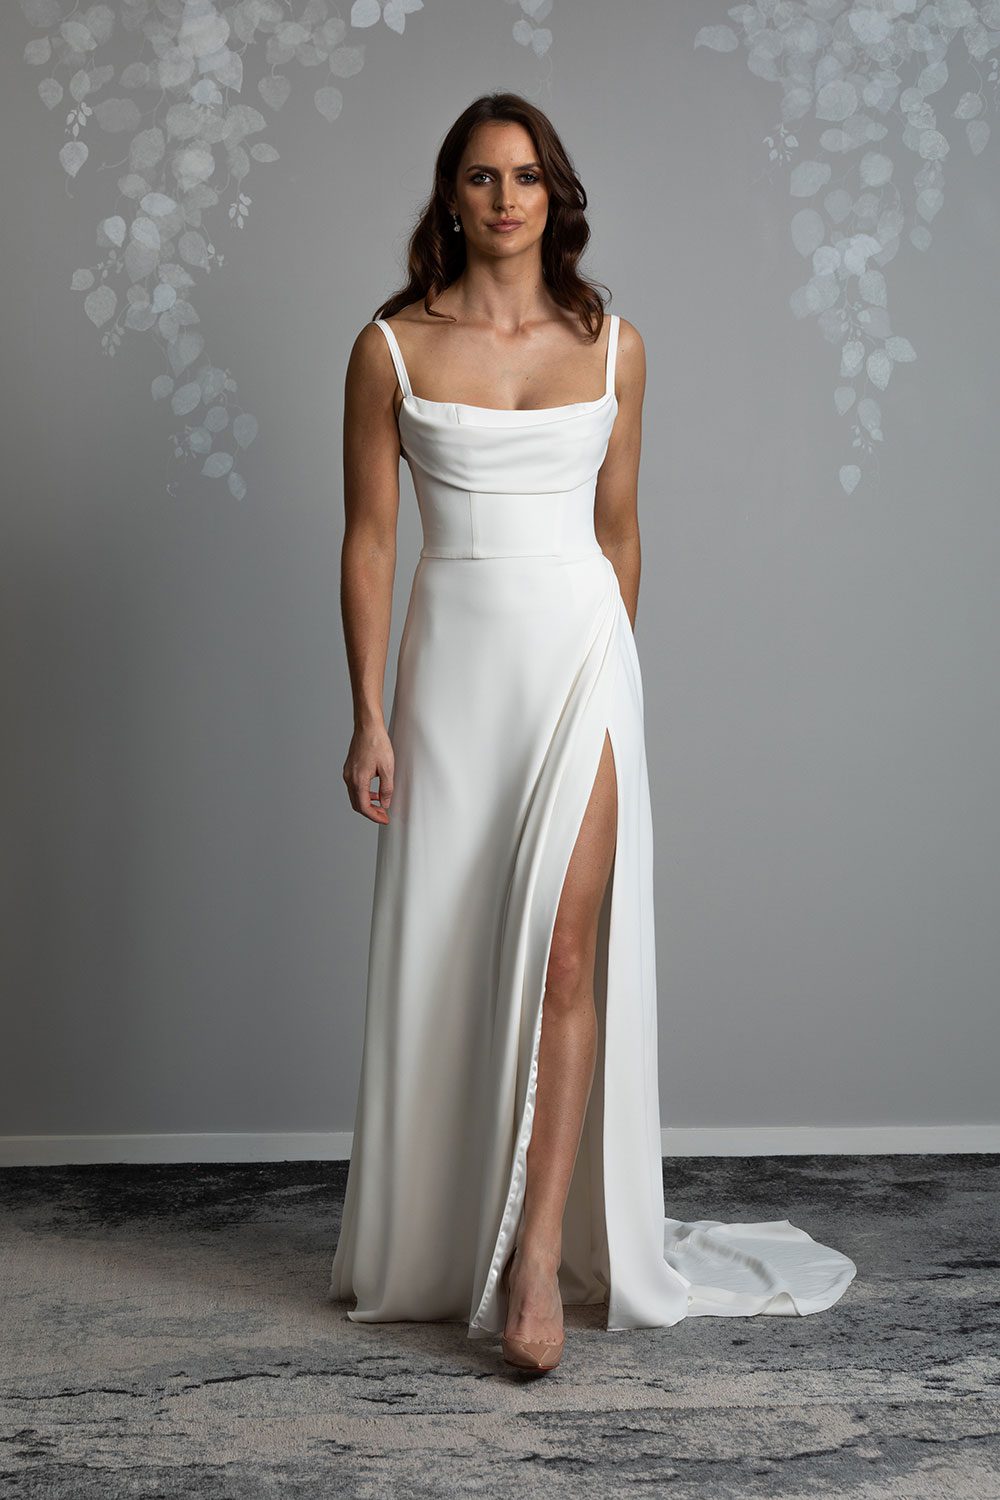 Evelyn Wedding Dress from Vinka Design. A divine gown made in a soft bridal crepe. It has a fitted bodice with soft draping over the bust line to flatter and enhance the figure. The straps compliment this detail by giving the bodice a softened square neckline. The skirt elegantly falls in folds from the side, revealing a flirtatious side split while in motion that falls closed again when still. Stunning front view of model walking in gown with fitted bodice with draping and long bridal crepe skirt with side split